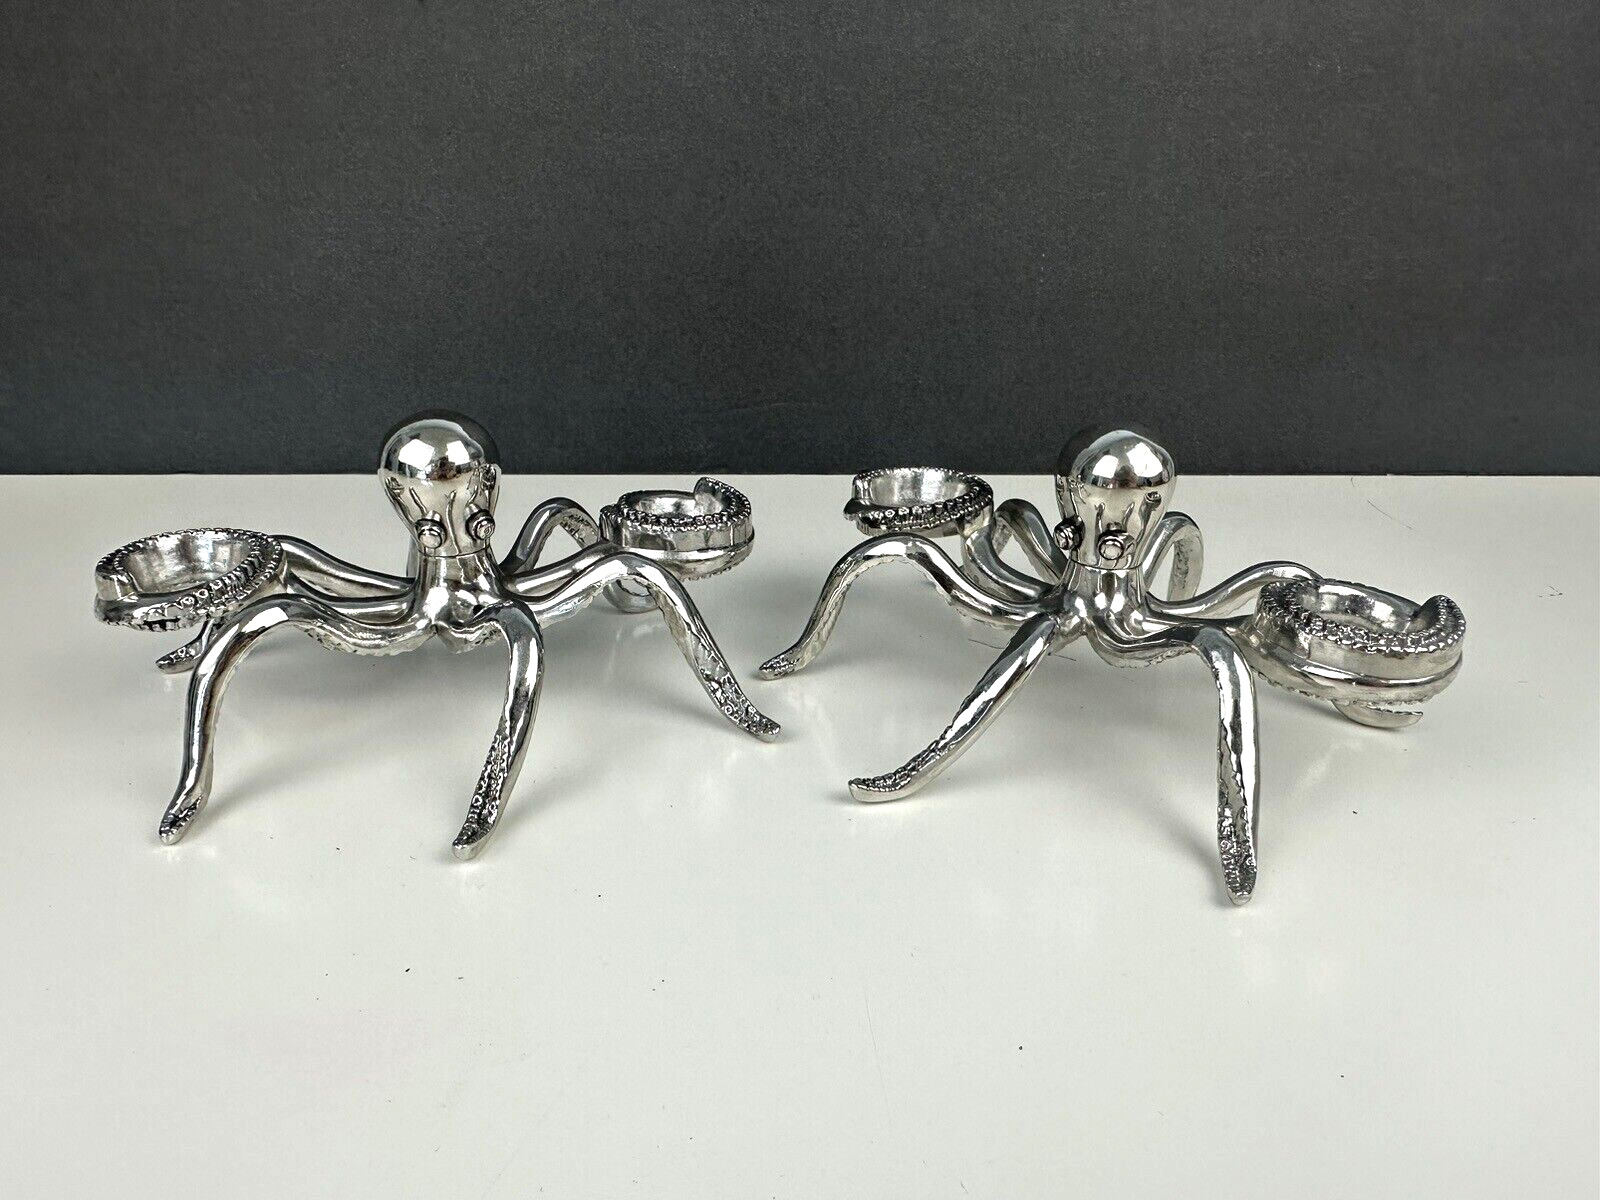 Mudpie Octopus Taper Candle Holder Six Legs Two Holders Set of 2 Ocean Decor B8